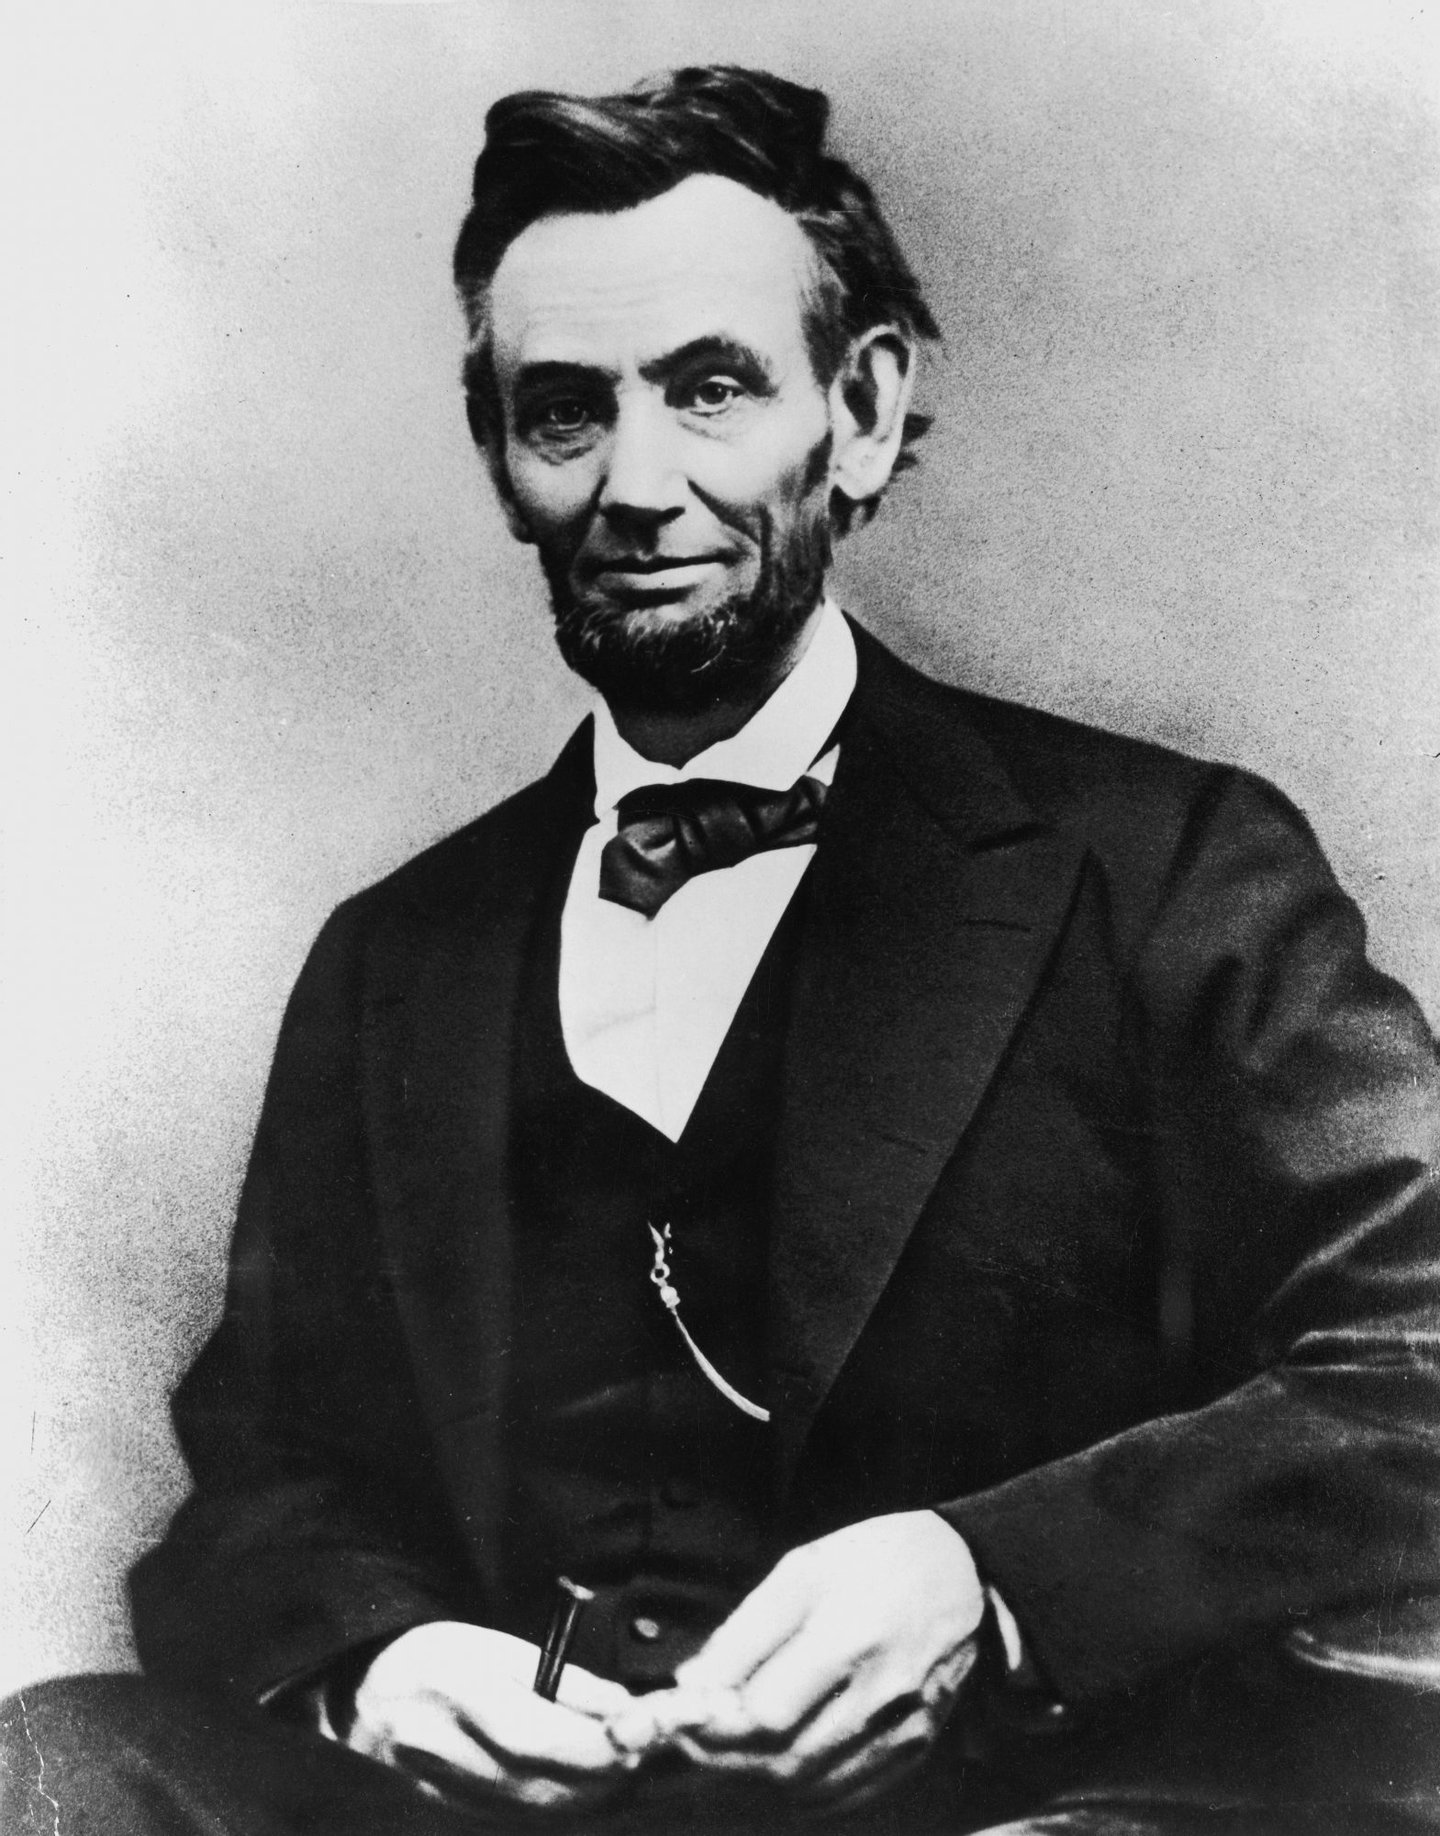 Portrait of American President Abraham Lincoln (1809 - 1865), the sixteenth President of the United States, dressed in a suit and bow tie, April 9, 1865. Five days after this portrait was taken President Lincoln was assassinated by John Wilkes Booth while attending a performance of 'Our American Cousin' at Ford's Theater. (Photo by Alexander Gardner/Getty Images)